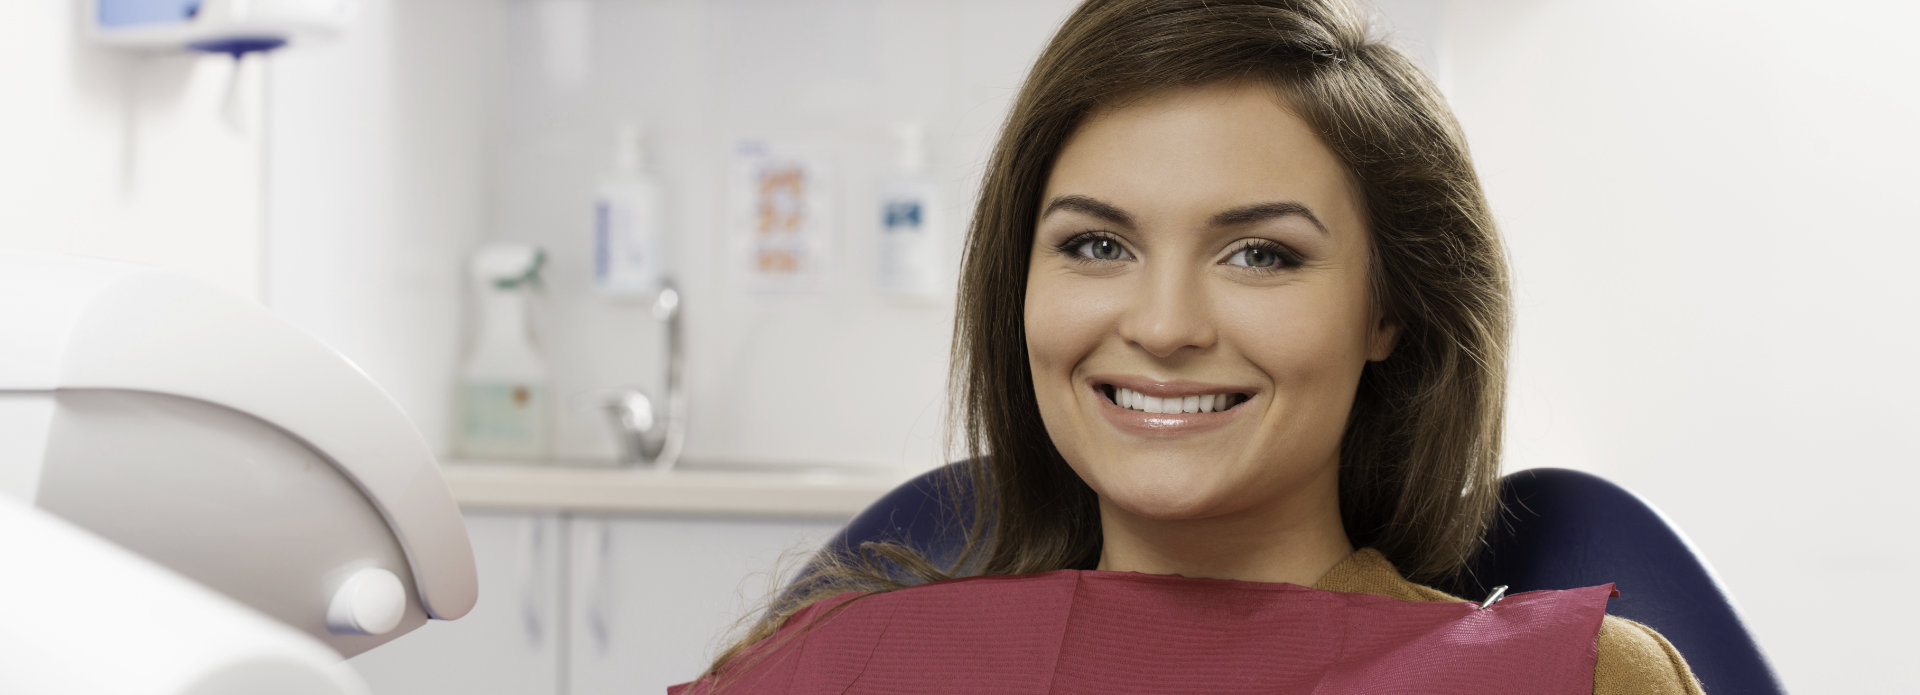 young woman with a beautiful smile in a dental chair